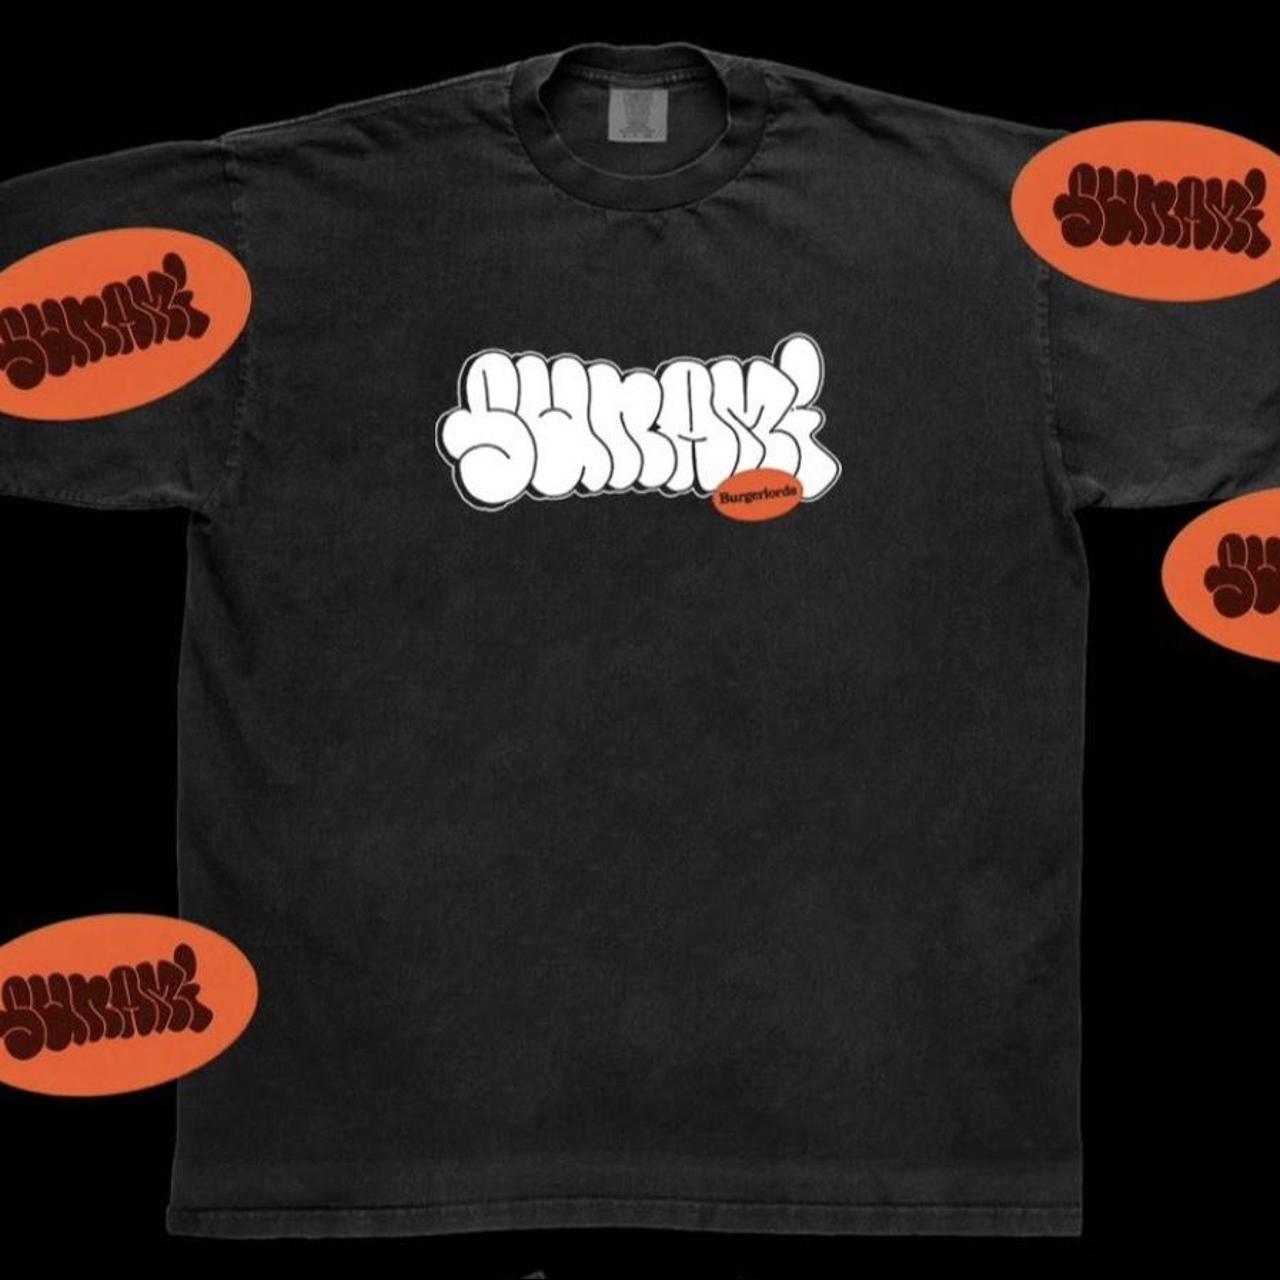 Supreme T Shirts, Latest & Limited Designs